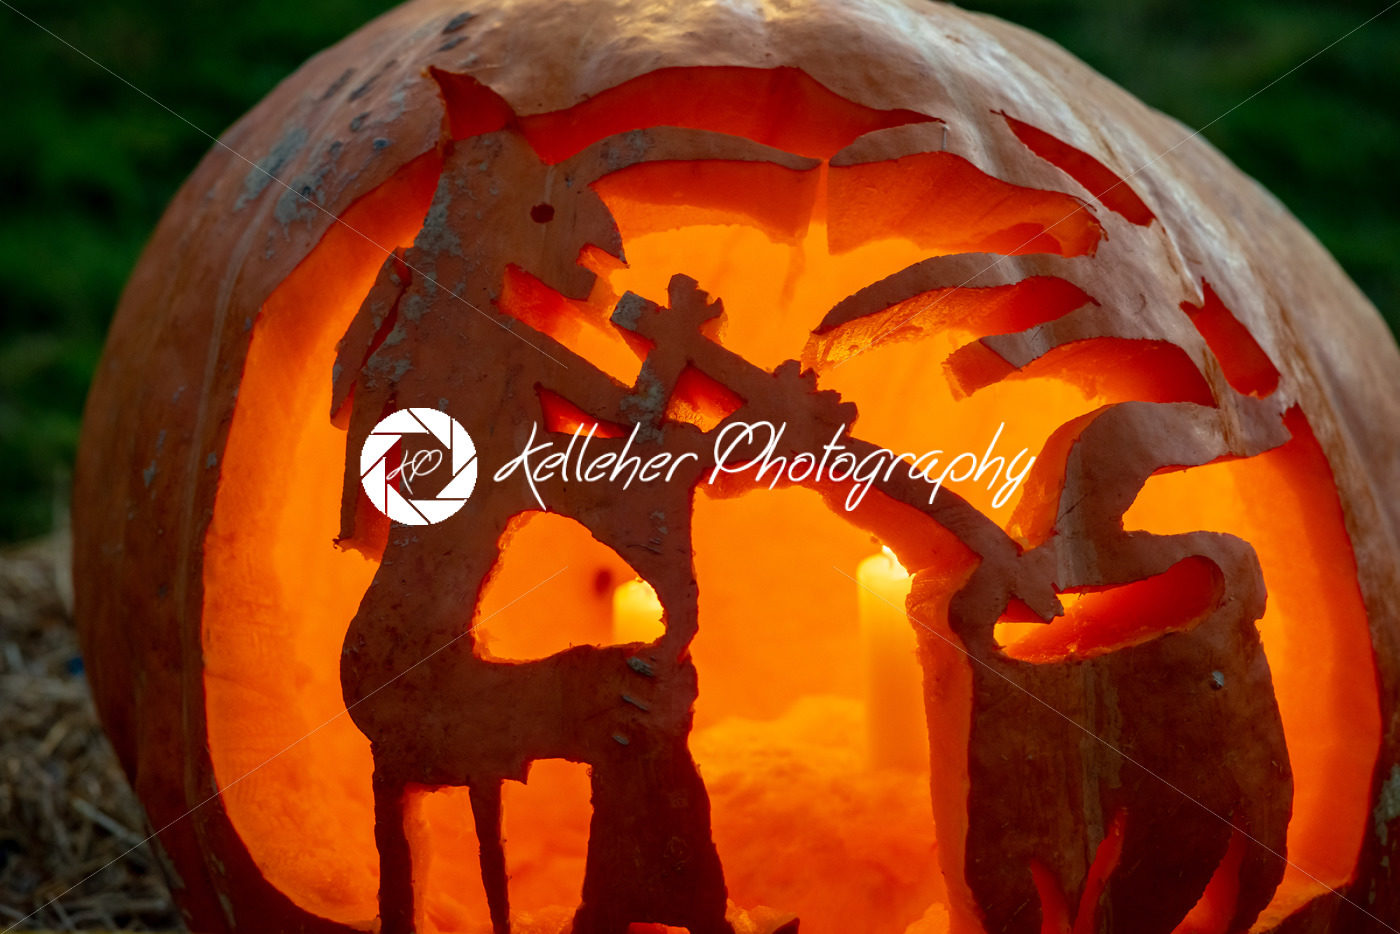 CHADDS FORD, PA – OCTOBER 18: Witch and Caludron at The Great Pumpkin Carve carving contest on October 18, 2018 - Kelleher Photography Store